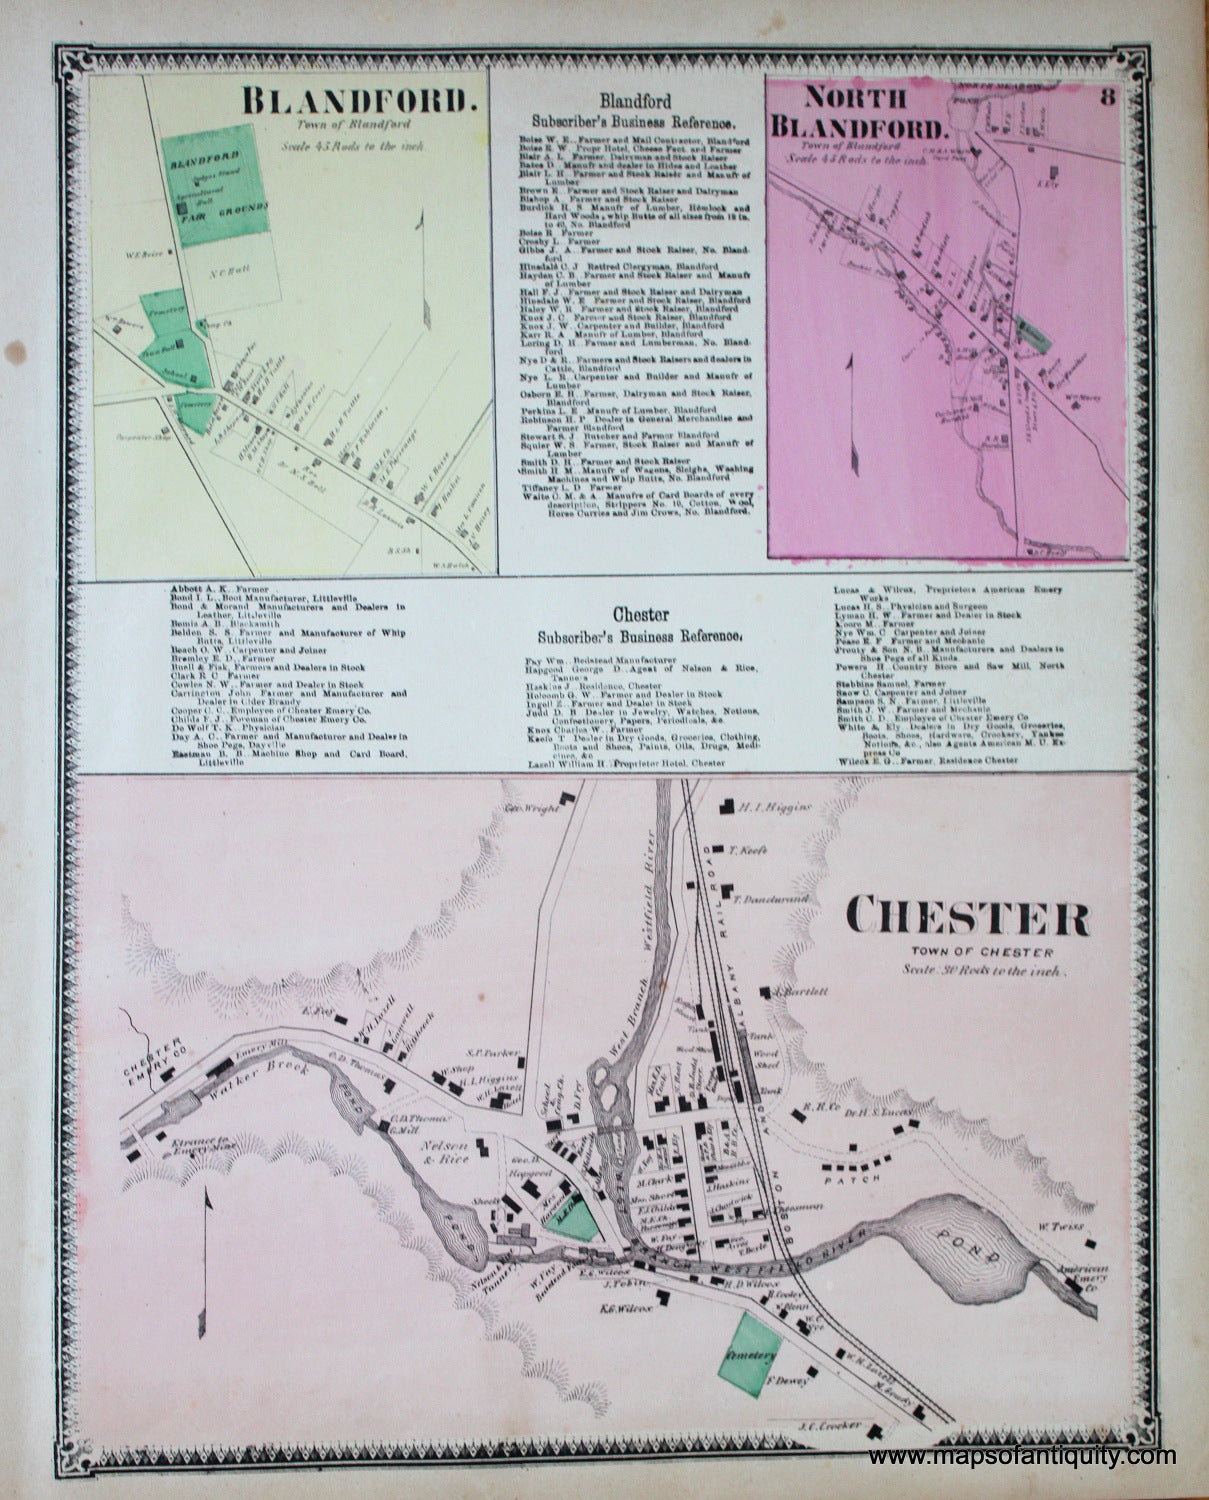 Antique-Hand-Colored-Map-Chester-Blandford-North-Blandford-(MA)-p.-8-Massachusetts-Hampden-County-1870-Beers-Ellis-and-Soule-Maps-Of-Antiquity